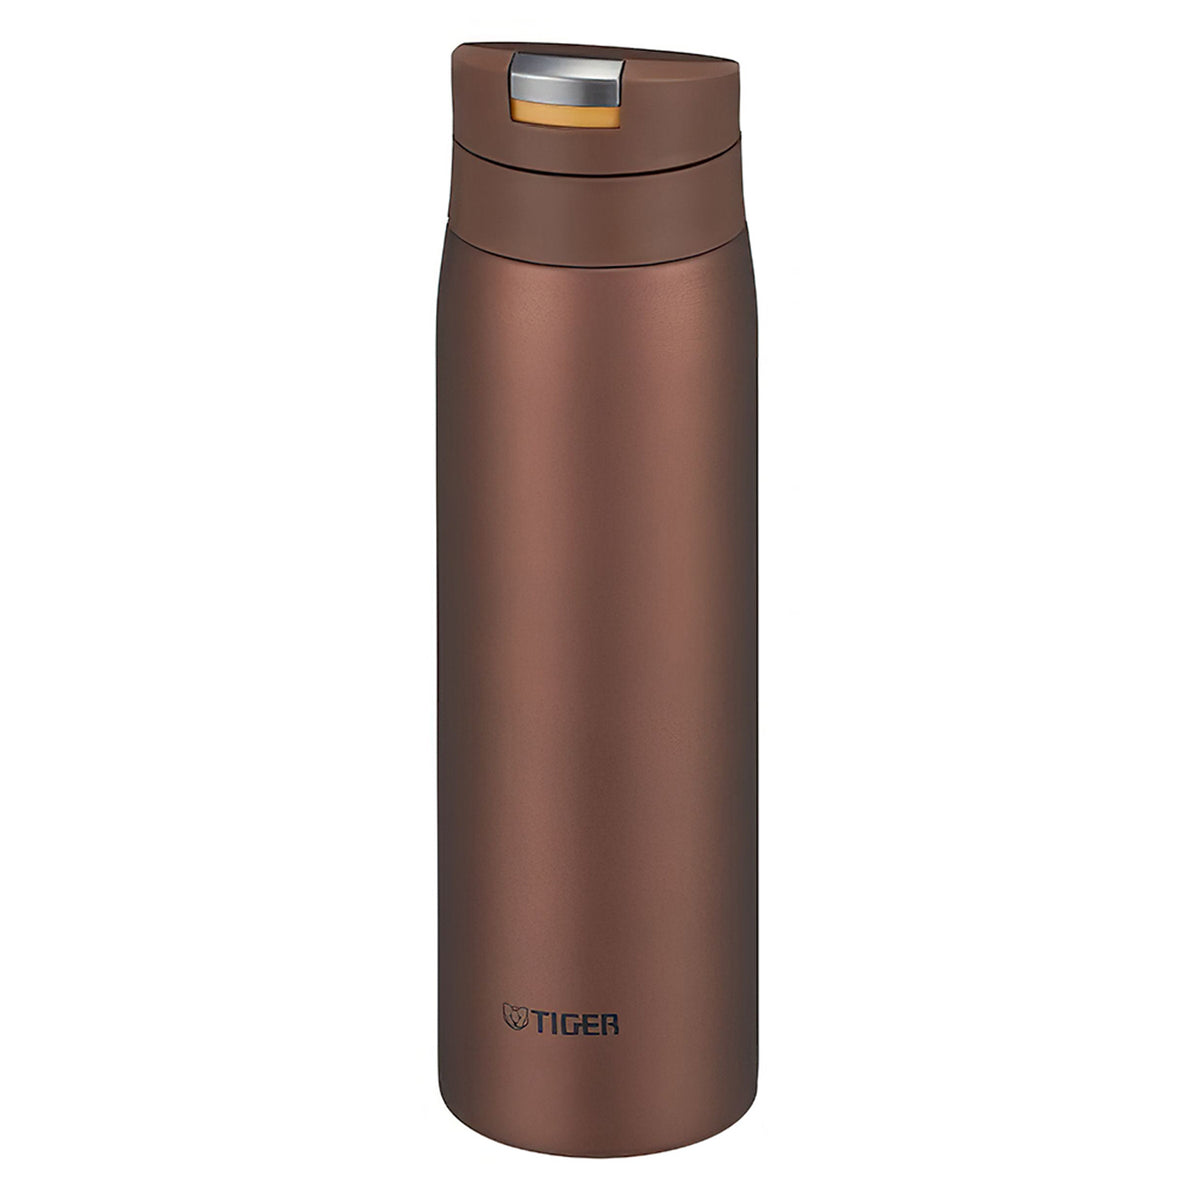 TIGER One Touch Mug Bottle Stainless Steel Water Bottle